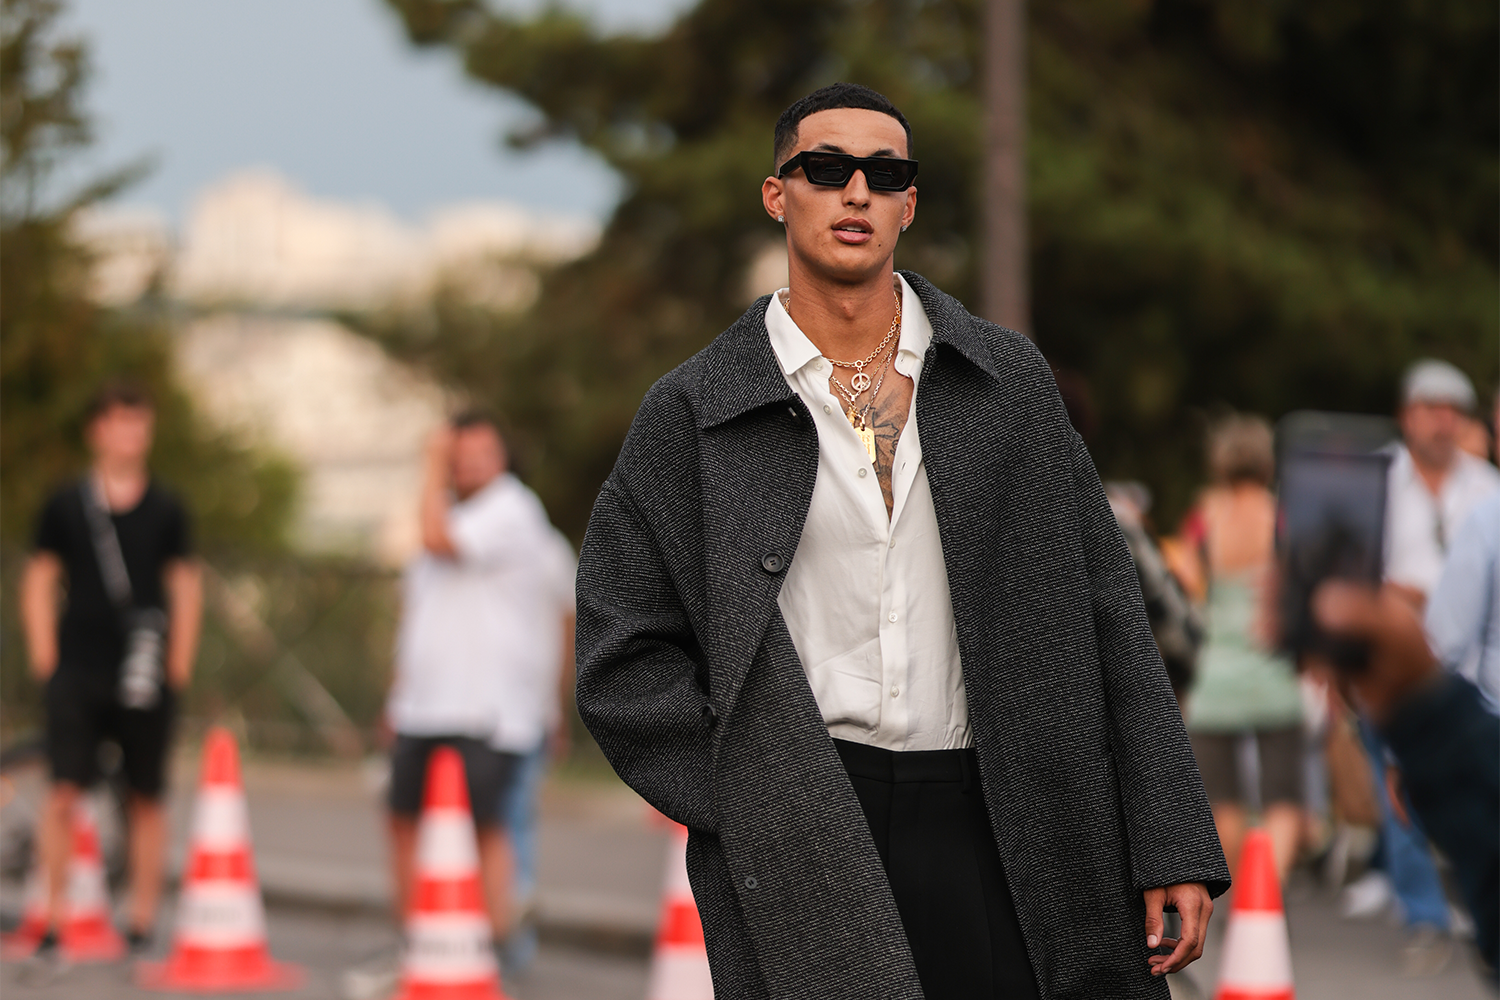 Kyle Kuzma: Beyond The Court - Fashion, Timepieces, and Personal Influences